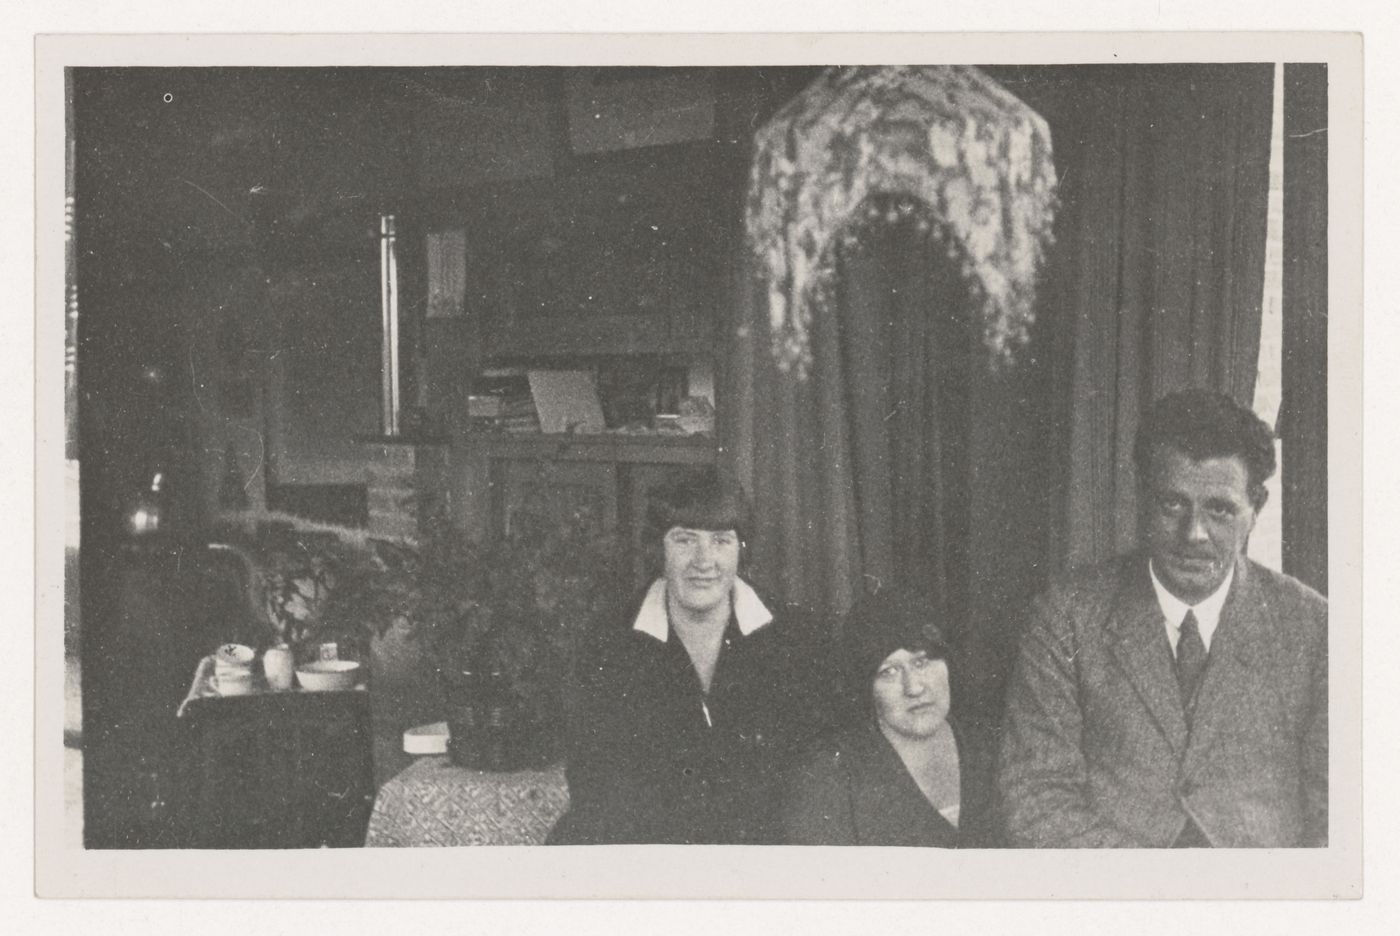 Portrait of J.J.P. Oud, his wife and possibly Helena Syrkus, Kijkduin, The Hague, Netherlands; verso: Letter from Helena Syrkus to Miss Annie, 27 March 1929